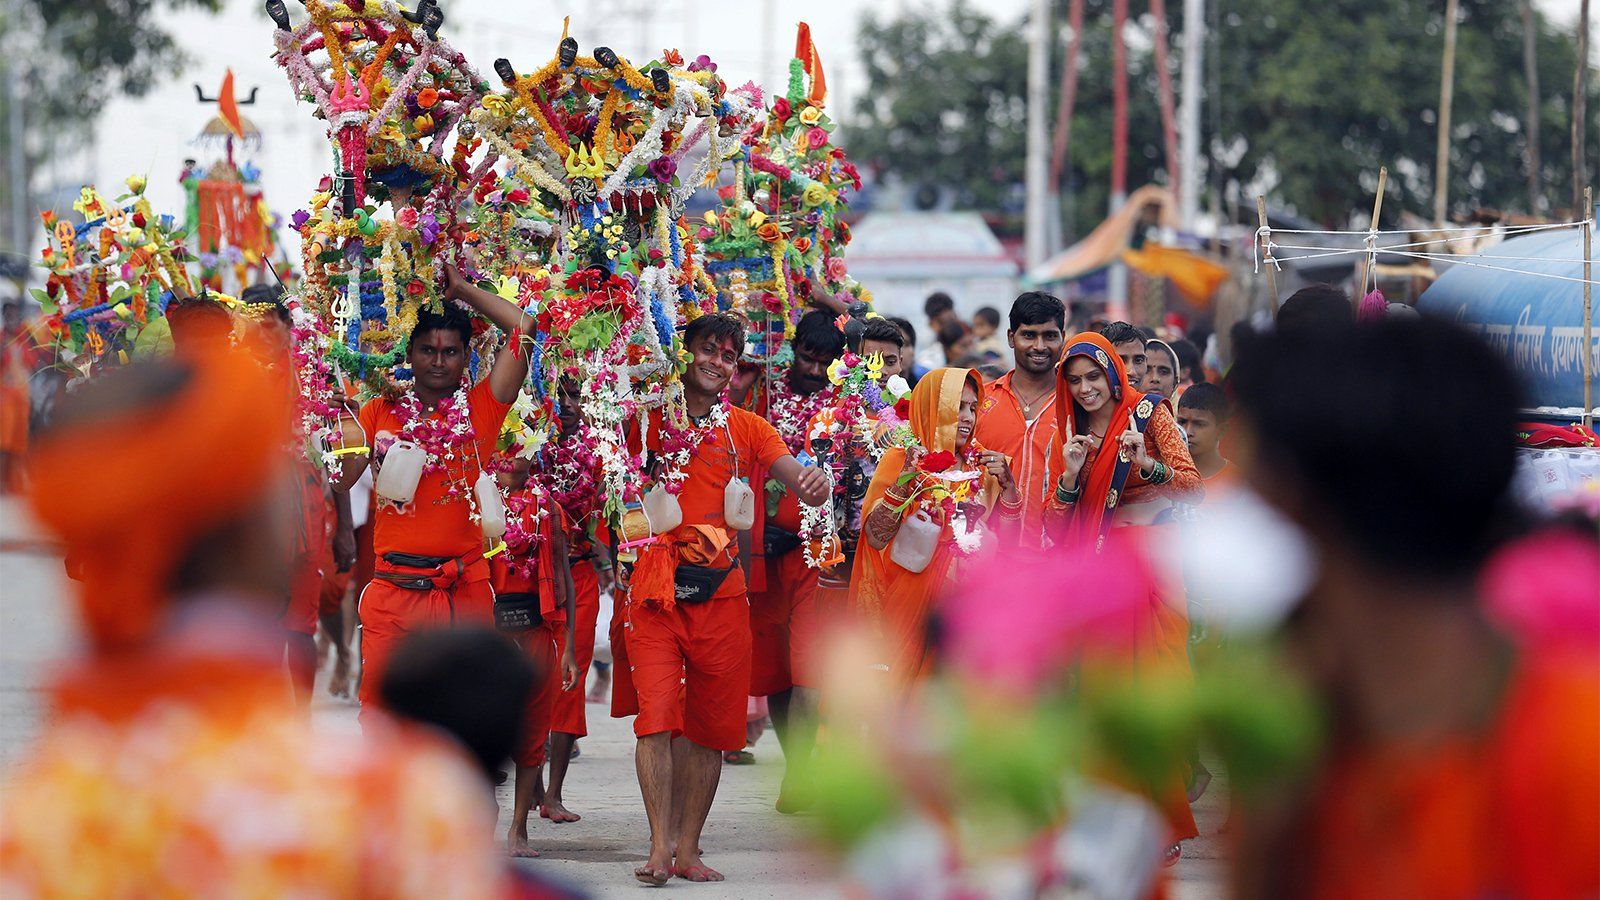 Hindu pilgrims, known as Kanwarias, walk near the banks of the Ganges River in Prayagraj, India, on July 25, 2019. Kanwarias are devotees performing a ritual pilgrimage in which they walk the roads of India, clad in saffron, and carrying ornately decorated canisters of sacred water from the Ganges River over their shoulders to take back to Hindu temples in their hometowns, during the Hindu lunar month of Shravana. Image by Rajesh Kumar. India, 2019.